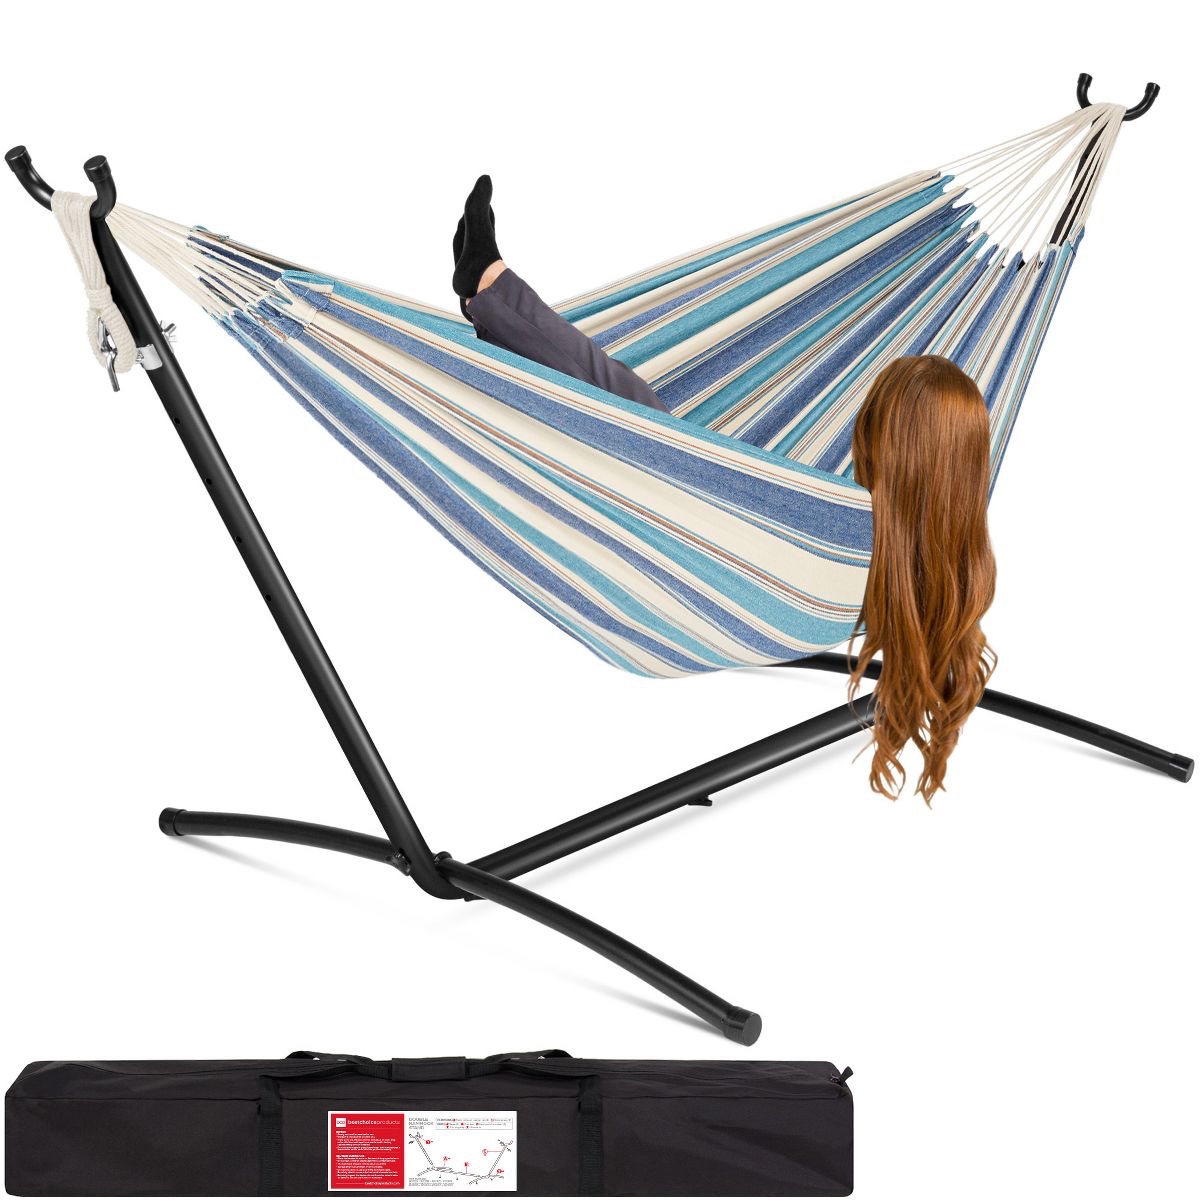 The Best Cheap Outdoor Patio Furniture Option: Best Choice Products 2-Person Brazilian-Style Hammock